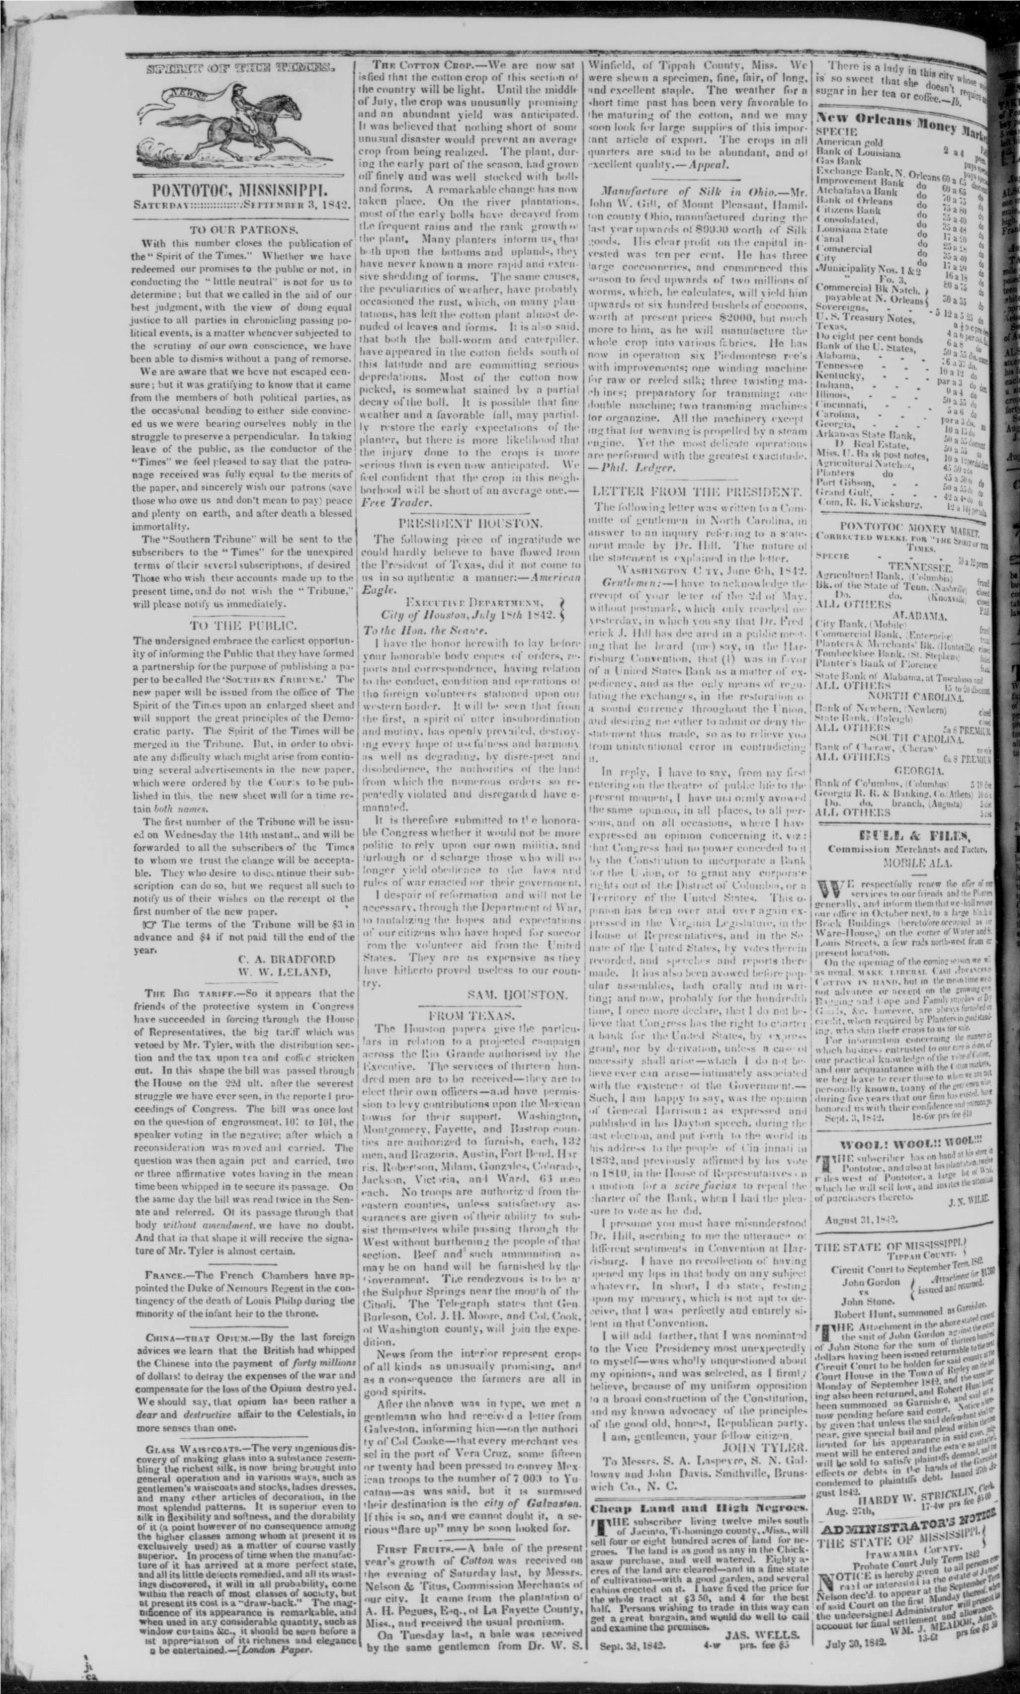 The Spirit of the Times (Pontotoc, Miss.), 1842-09-03, [P ]